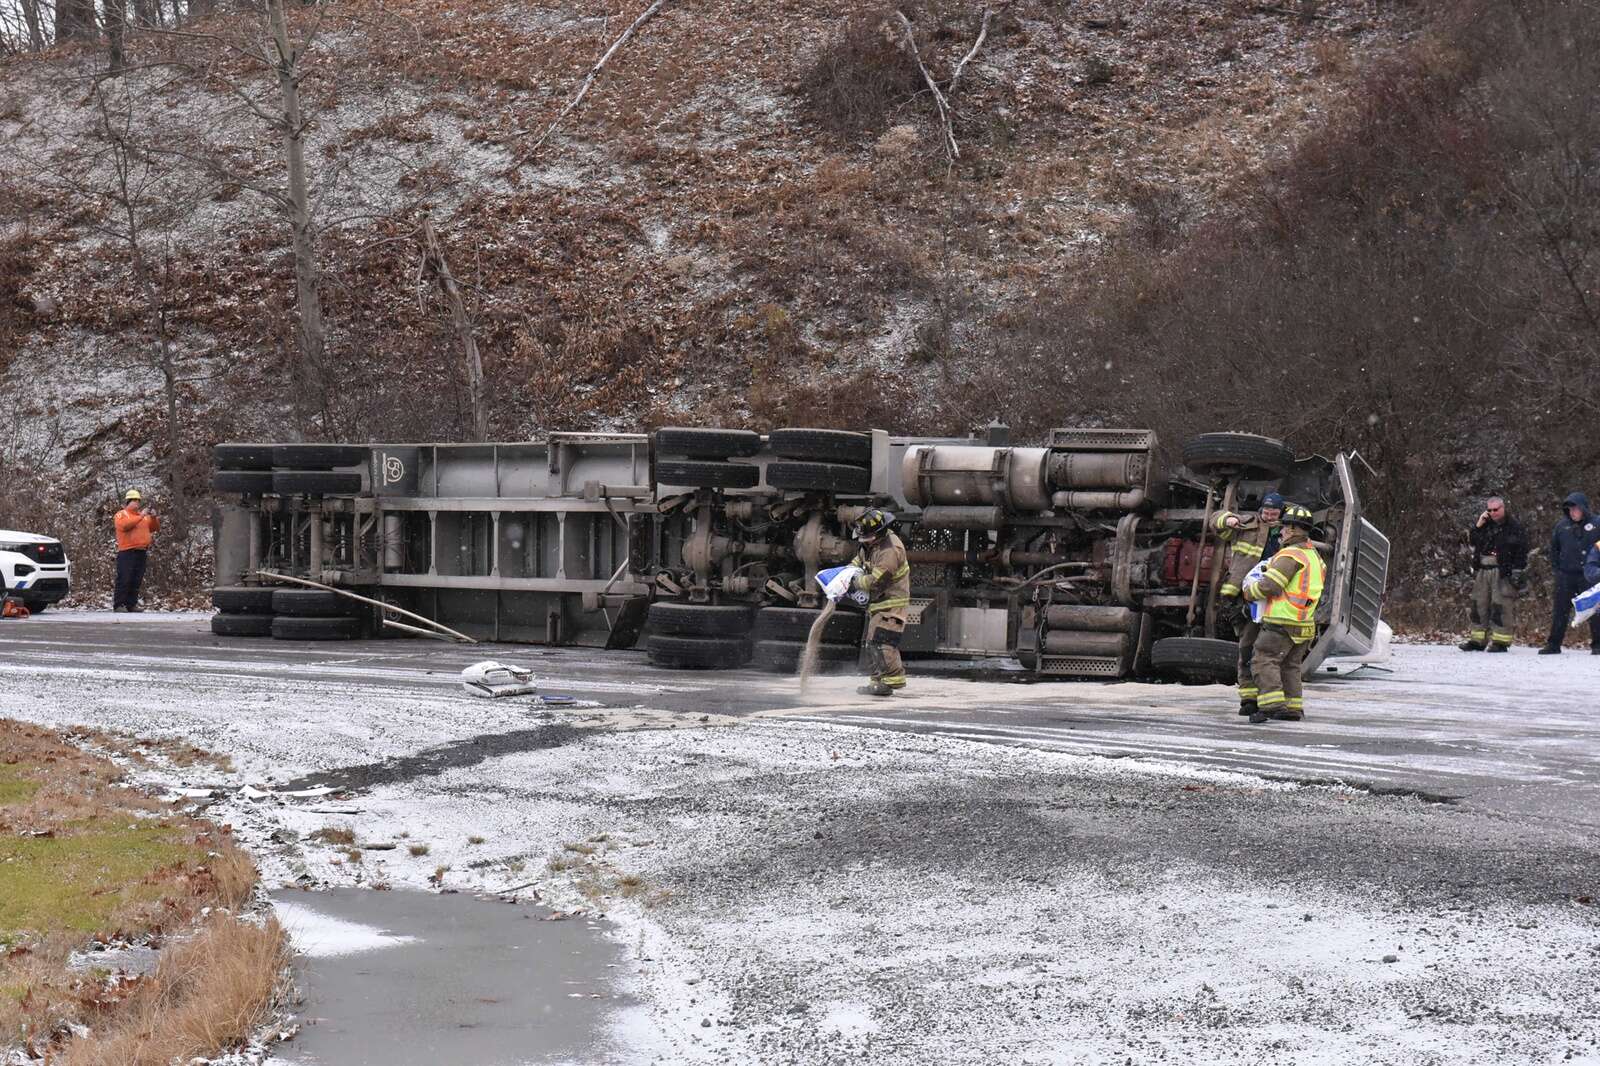 Tractor trailer overturned at the Cleveland-Cliffs access ramp